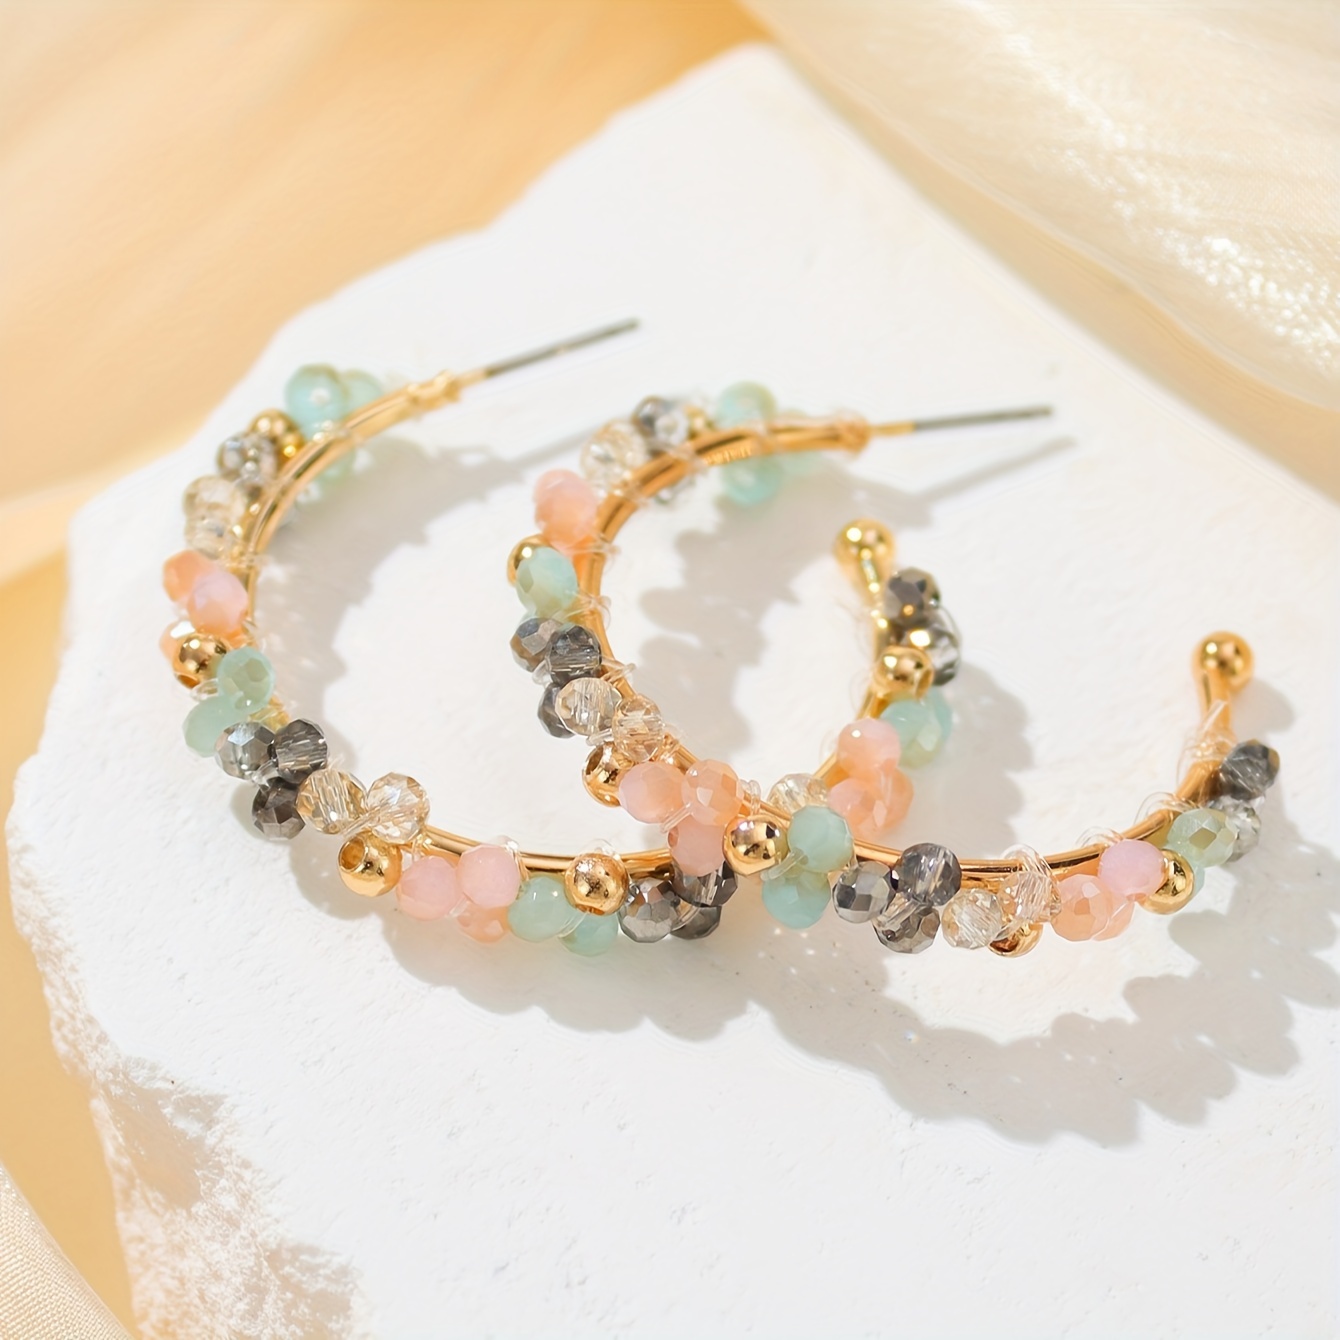 

1 Pair Bohemian Style Handcrafted Diy Glass Beaded Colorful Hoop Earrings, Elegant Ear Jewelry Perfect For Parties And Gifts